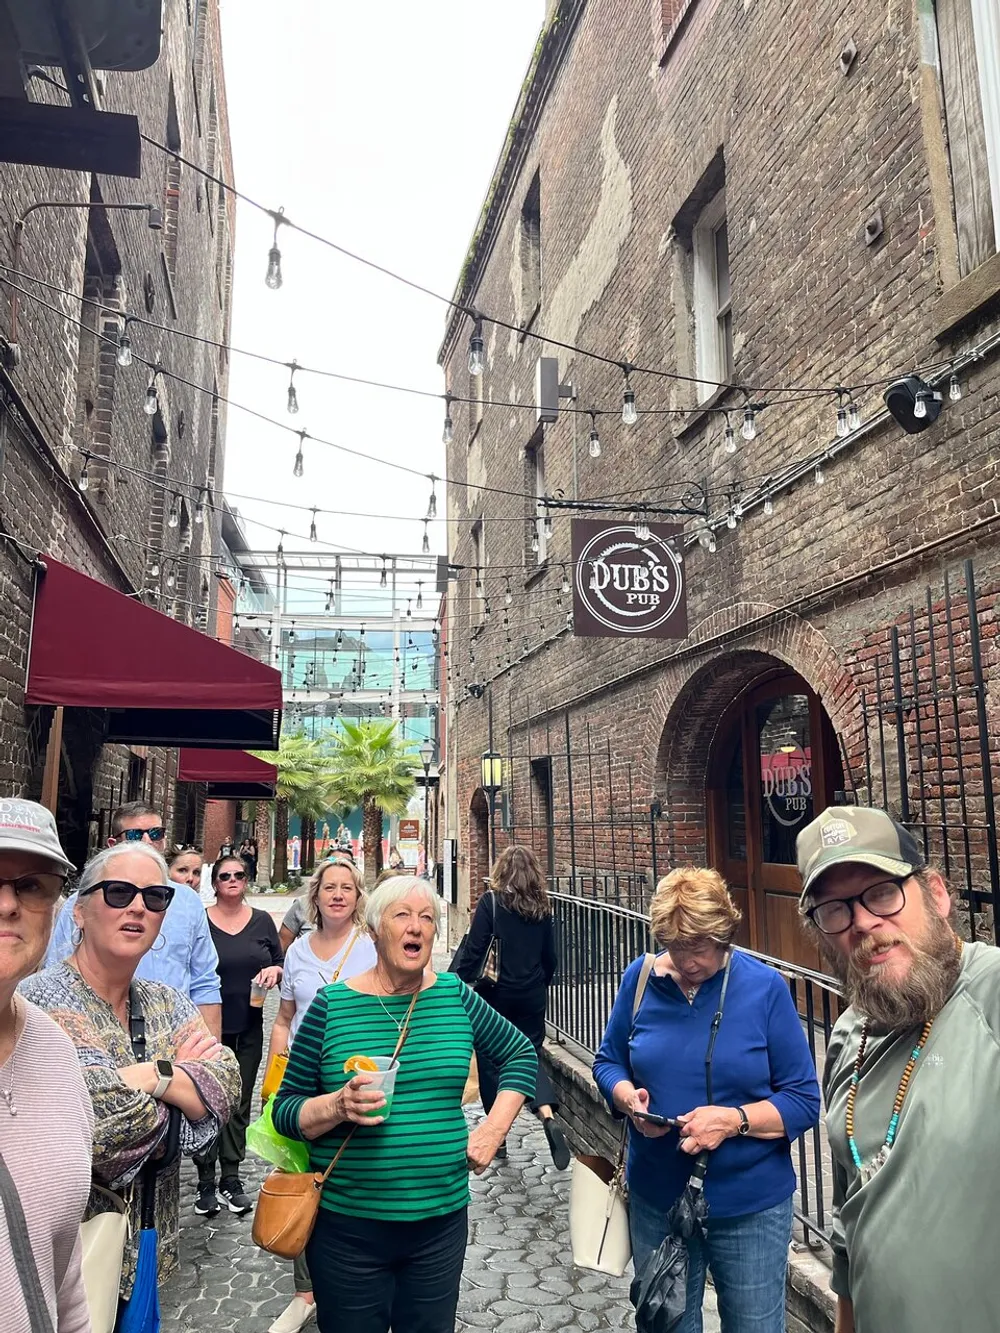 A group of people are standing in a narrow cobblestone alleyway with string lights overhead a pub sign visible and a mix of expressions suggesting they are engaged in a tour or group event